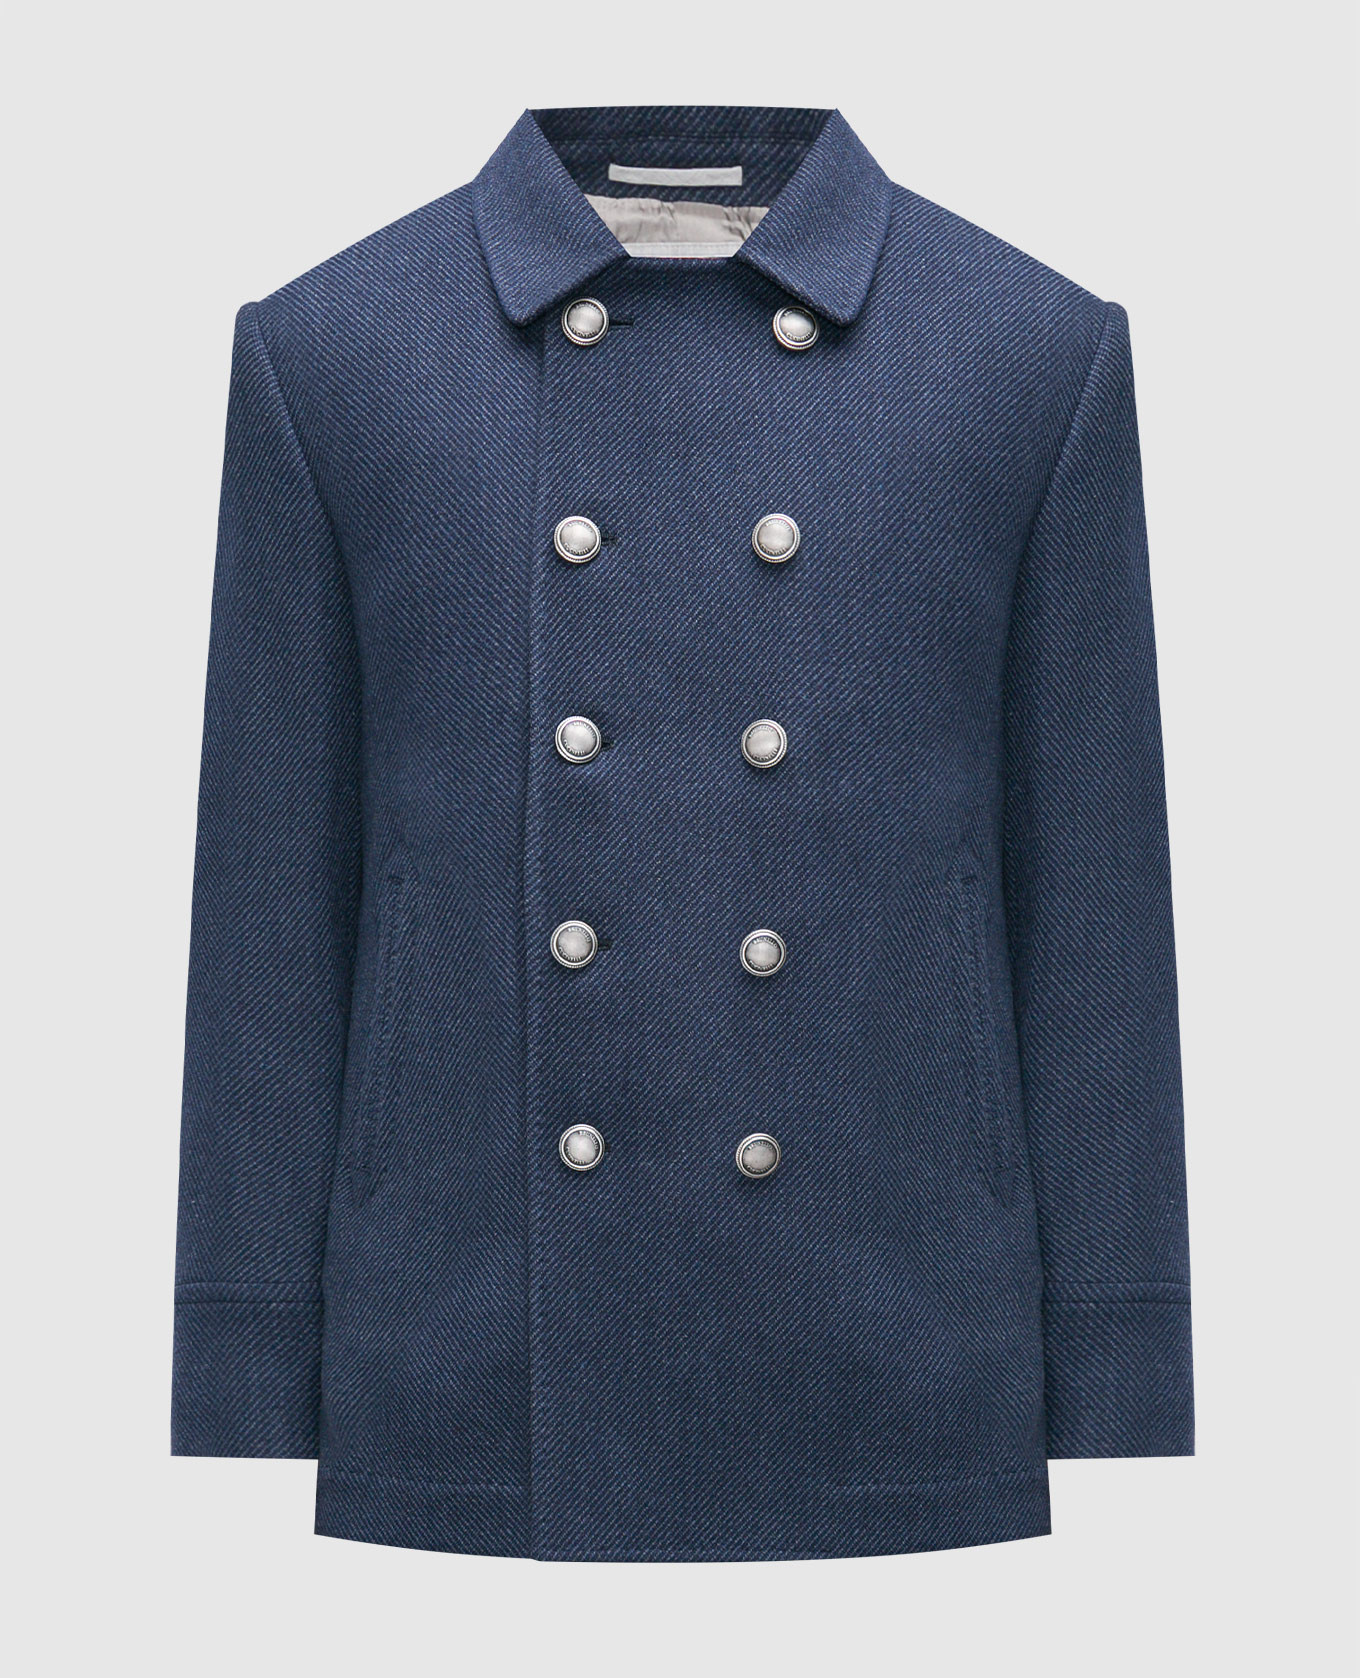 Blue double-breasted wool and cashmere coat